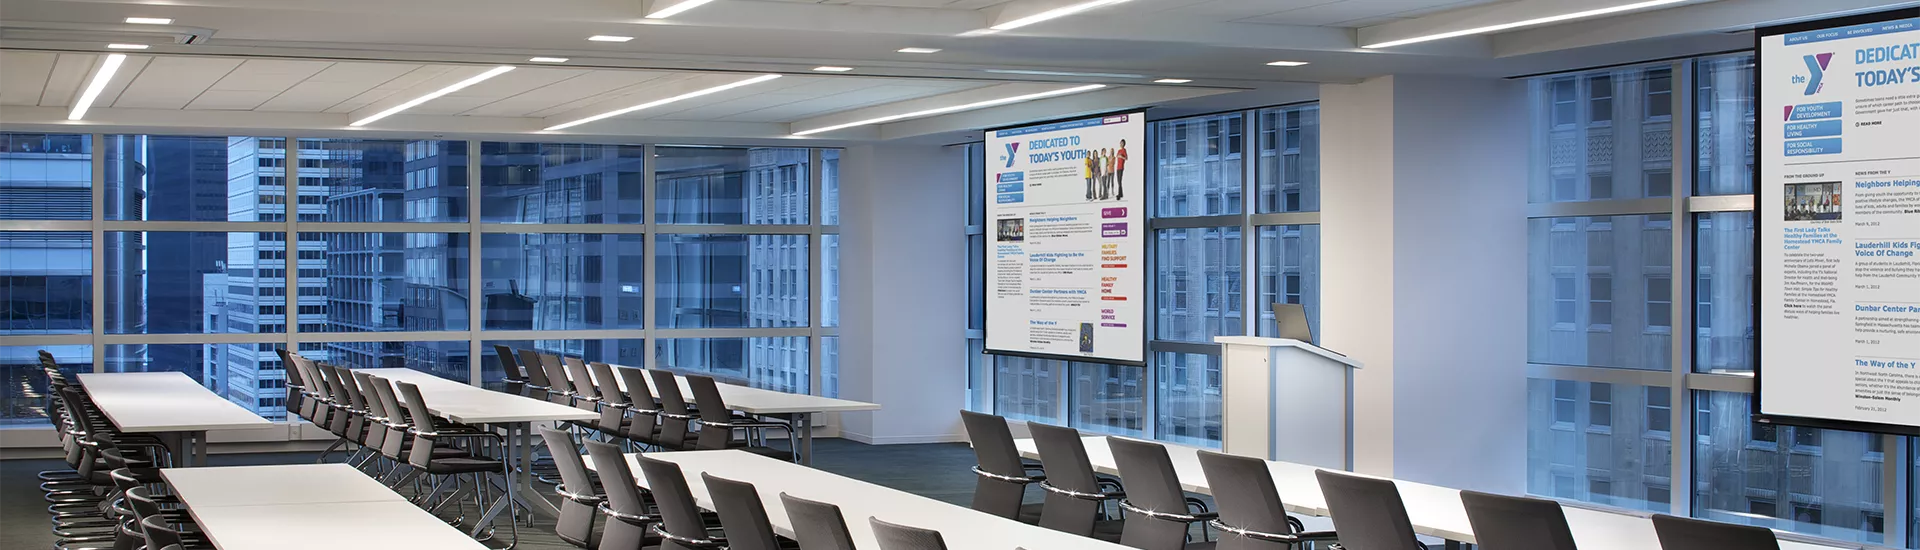 Access E projection screens in the YMCA headquarters, Chicago, IL. Photo by Michael Robinson.